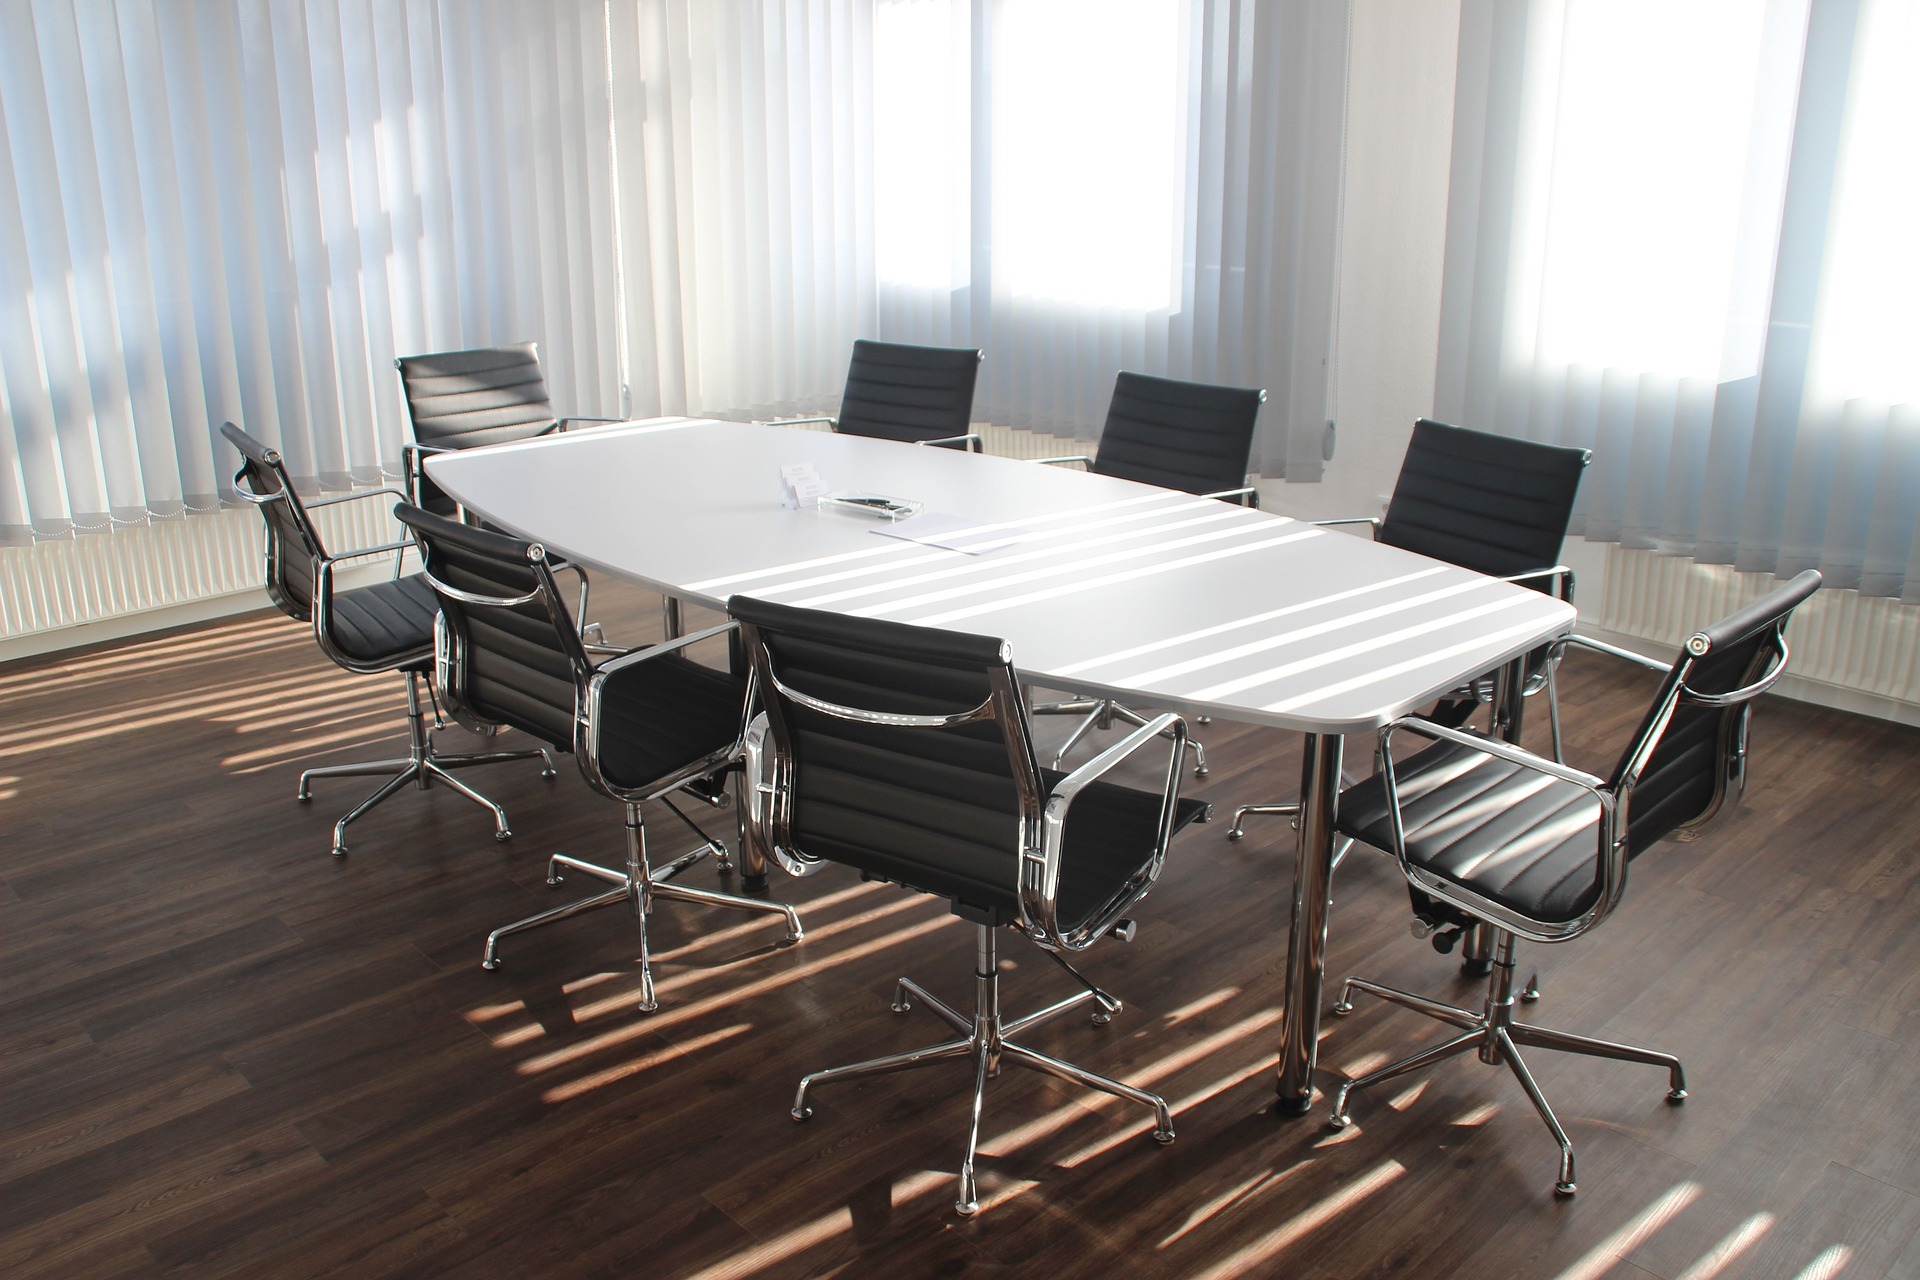 5 Ways to Improve Staff and Board Meetings